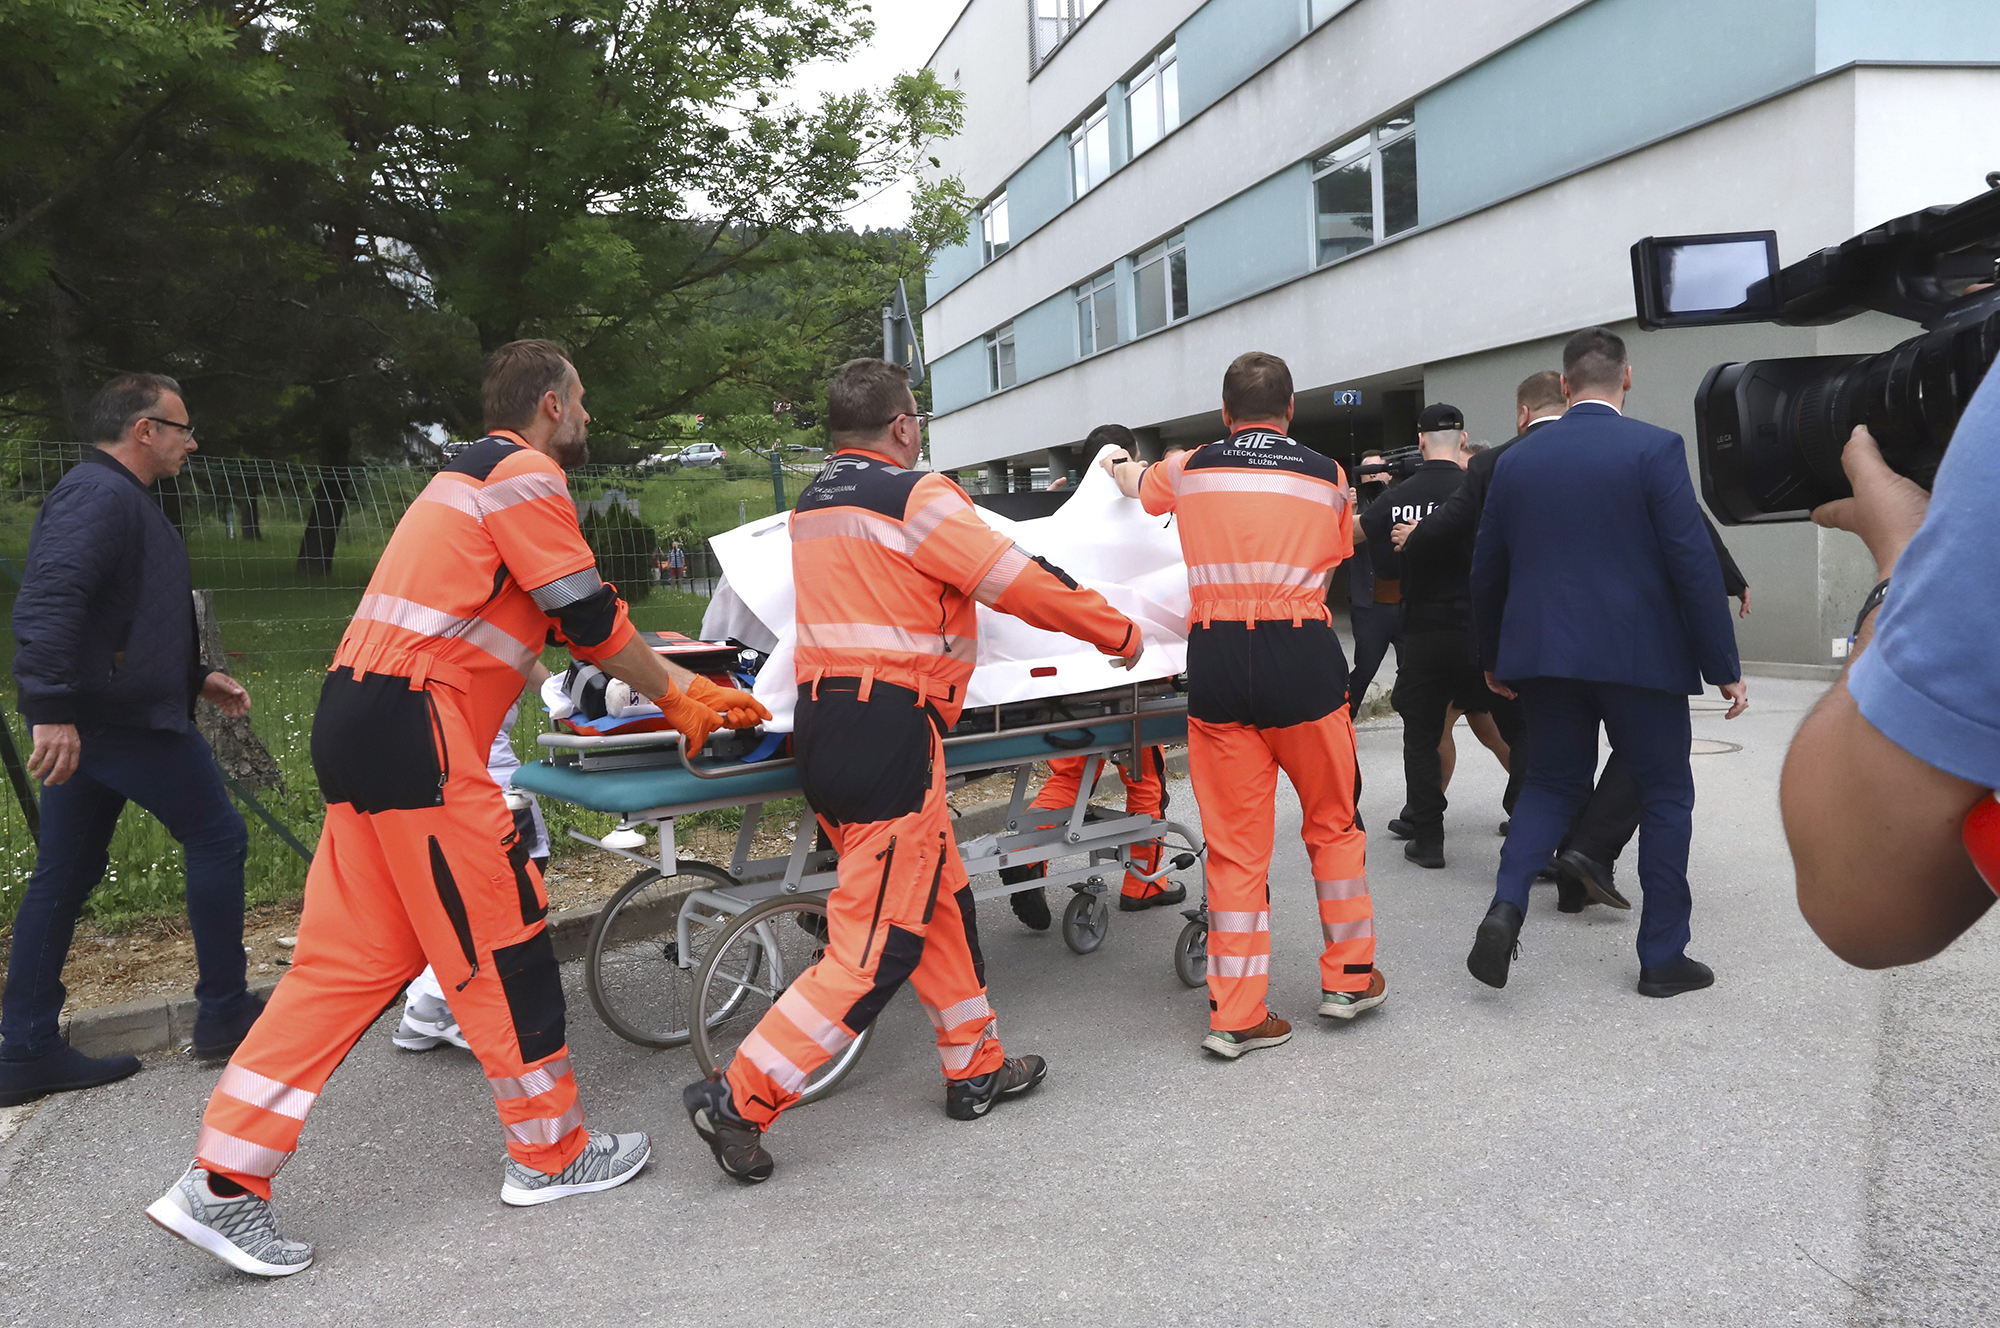 Rescue workers take Slovak Prime Minister Robert Fico, who was shot and injured, to a hospital in the town of Banska Bystrica, Slovakia, on May 15.